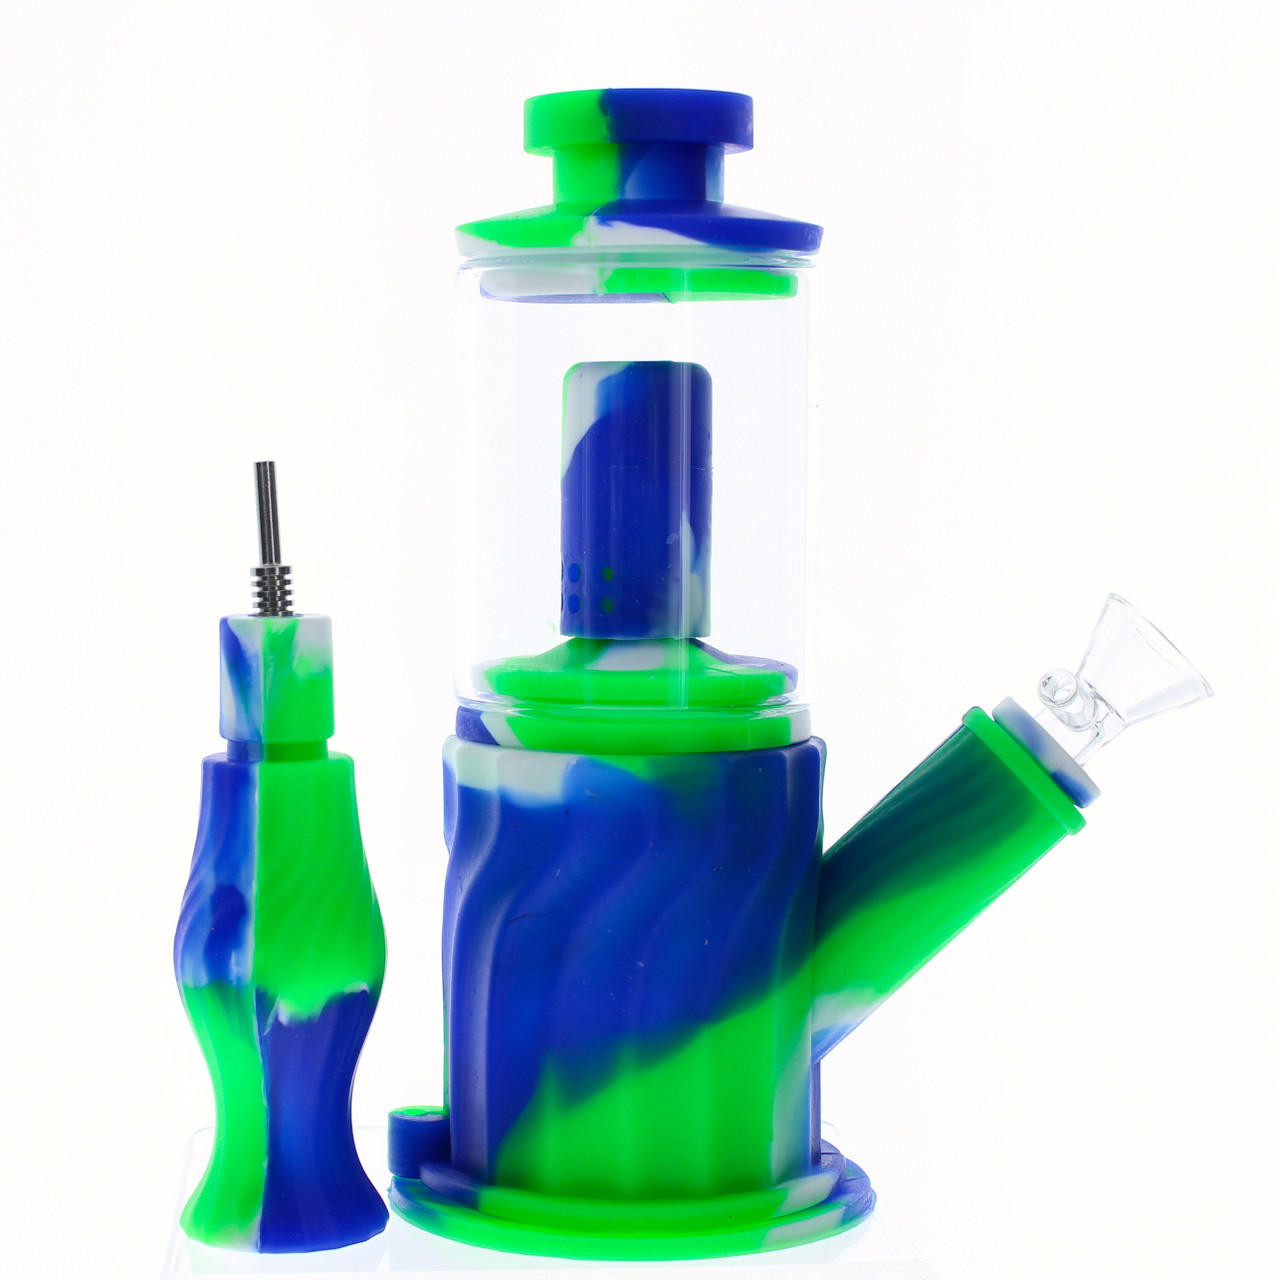 https://cdn11.bigcommerce.com/s-28tw9v9waz/images/stencil/1280x1280/products/1900/8815/vapebrat-11-4-in-1-silicone-glass-hybrid-water-pipe-nectar-collector-and-mini-rig-green-white-and-blue__94142.1681848478.jpg?c=1?imbypass=on